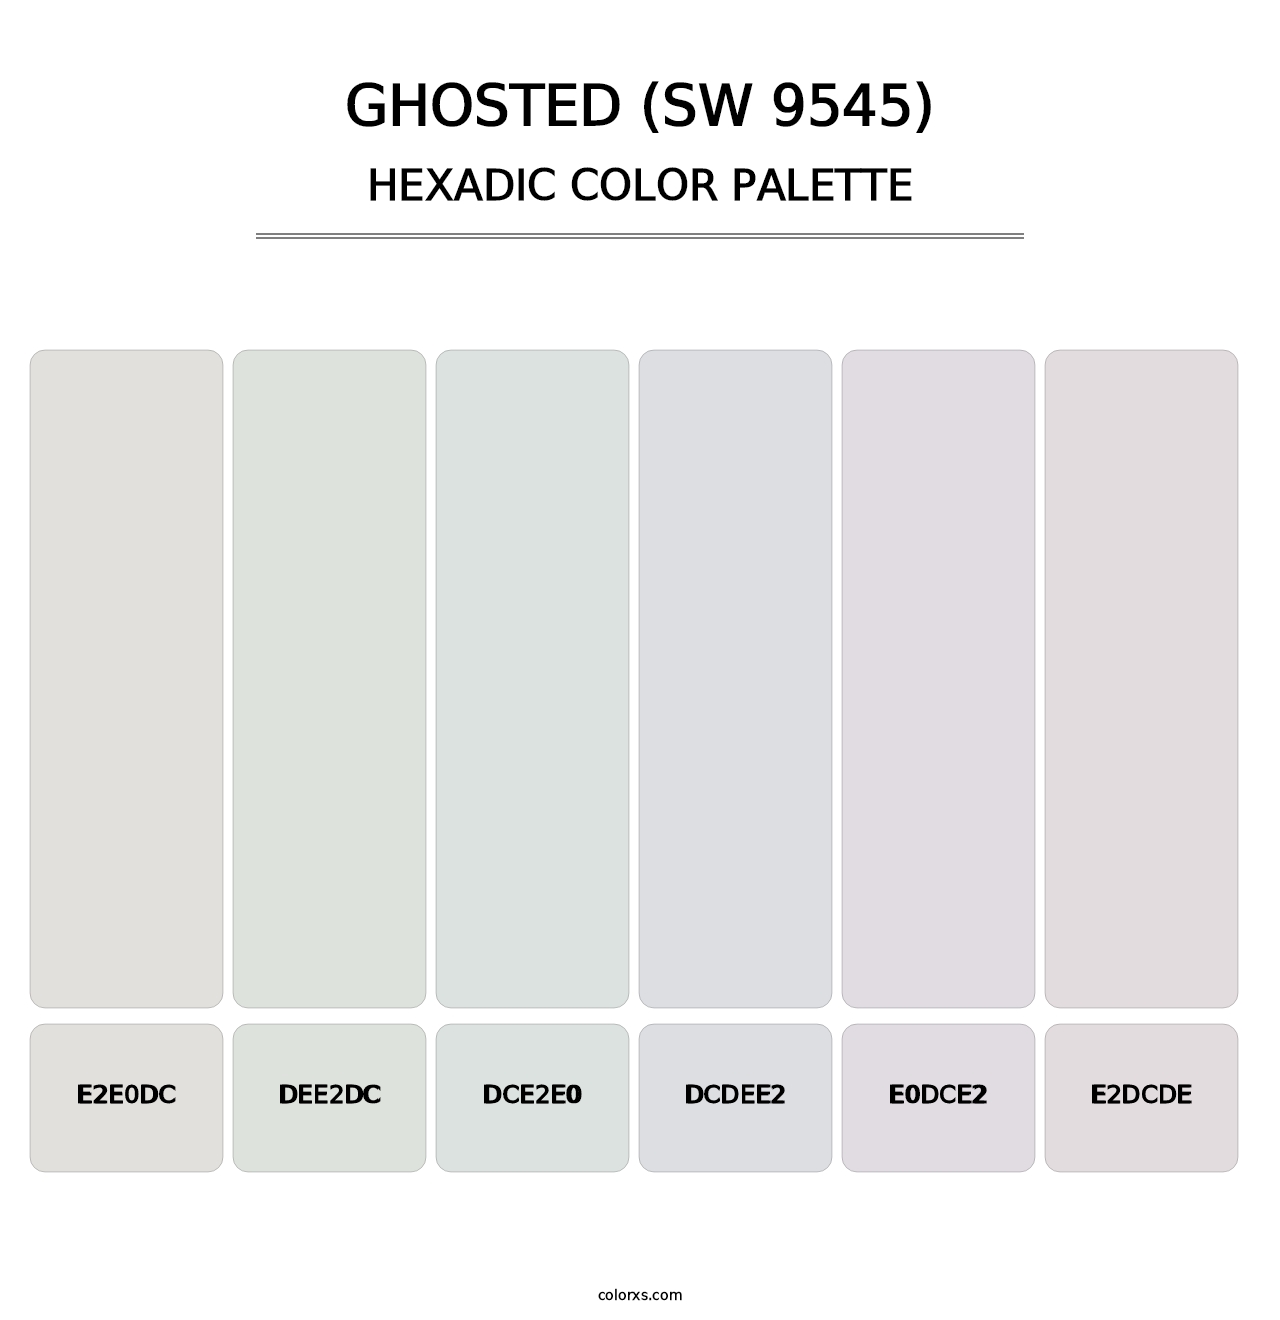 Ghosted (SW 9545) - Hexadic Color Palette